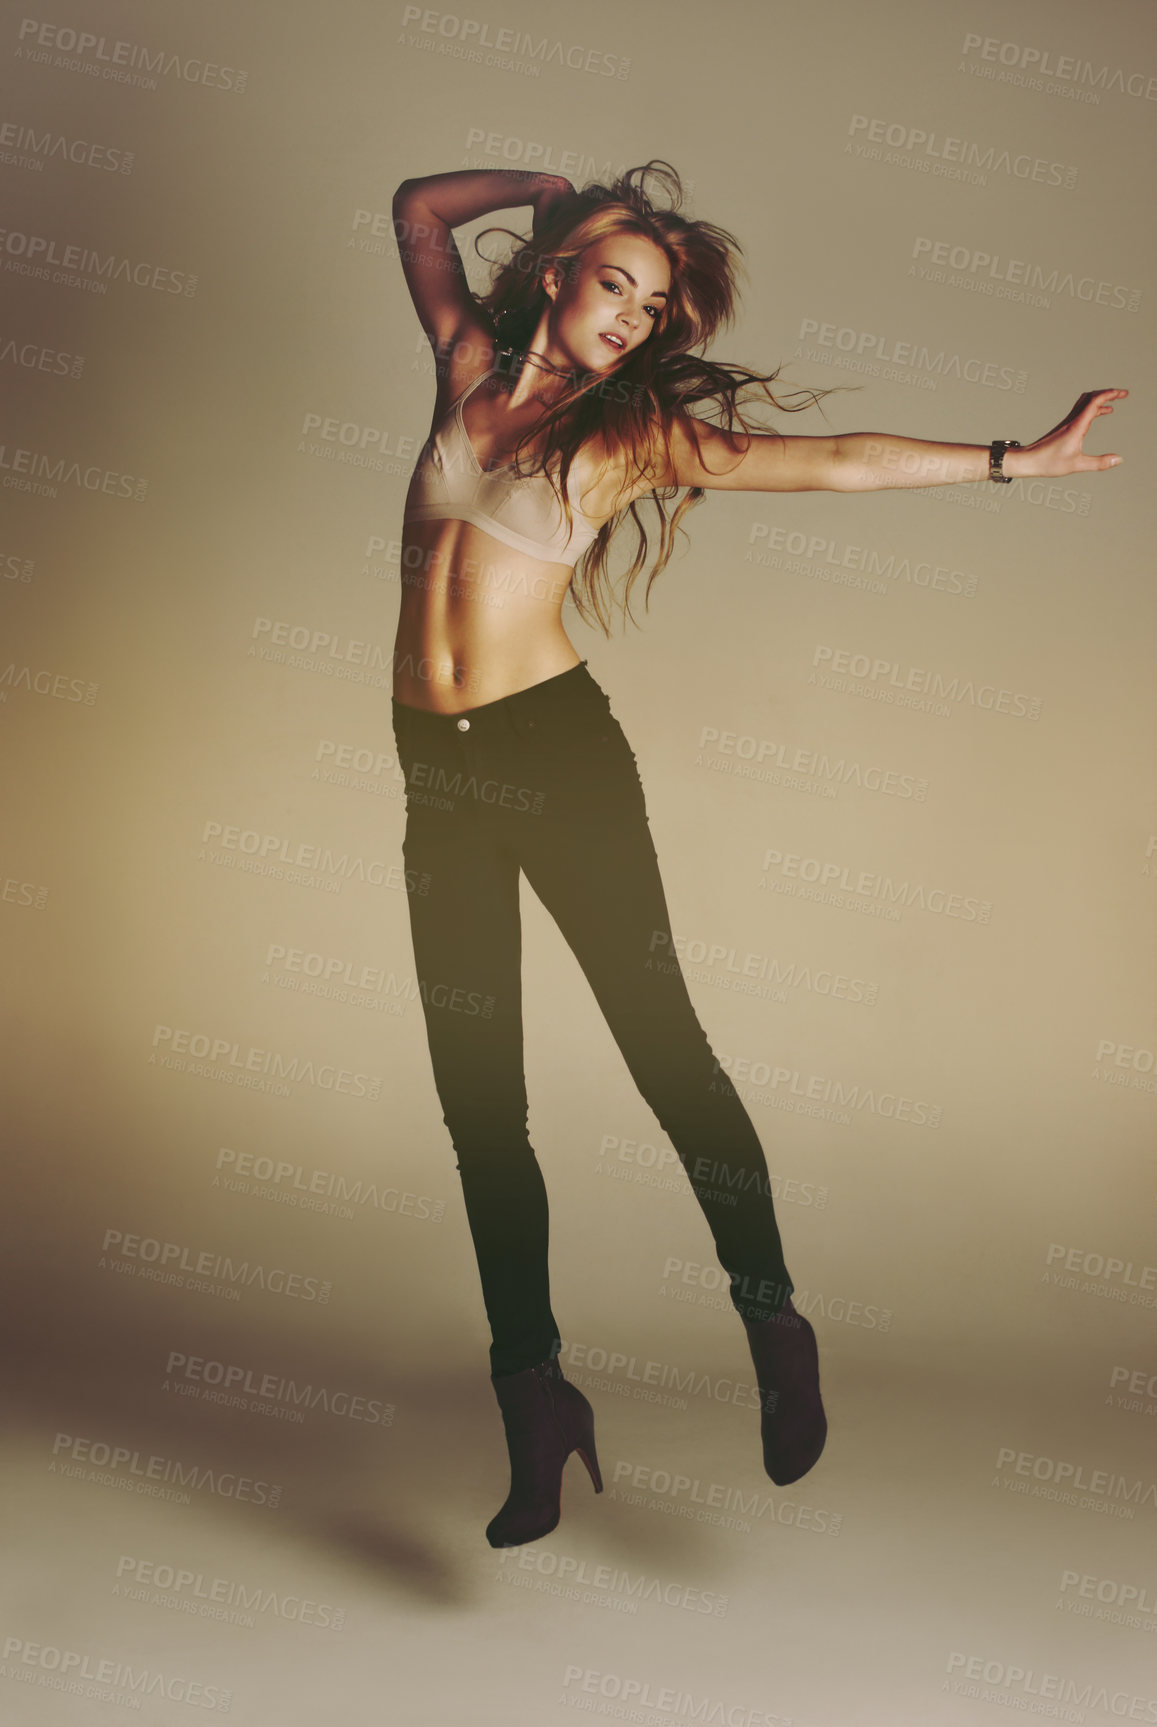 Buy stock photo Dance jump, woman and portrait of a young dancer model with casual fashion and confidence. Isolated, studio background and dancing pose of a female person with youth, body freedom and natural beauty